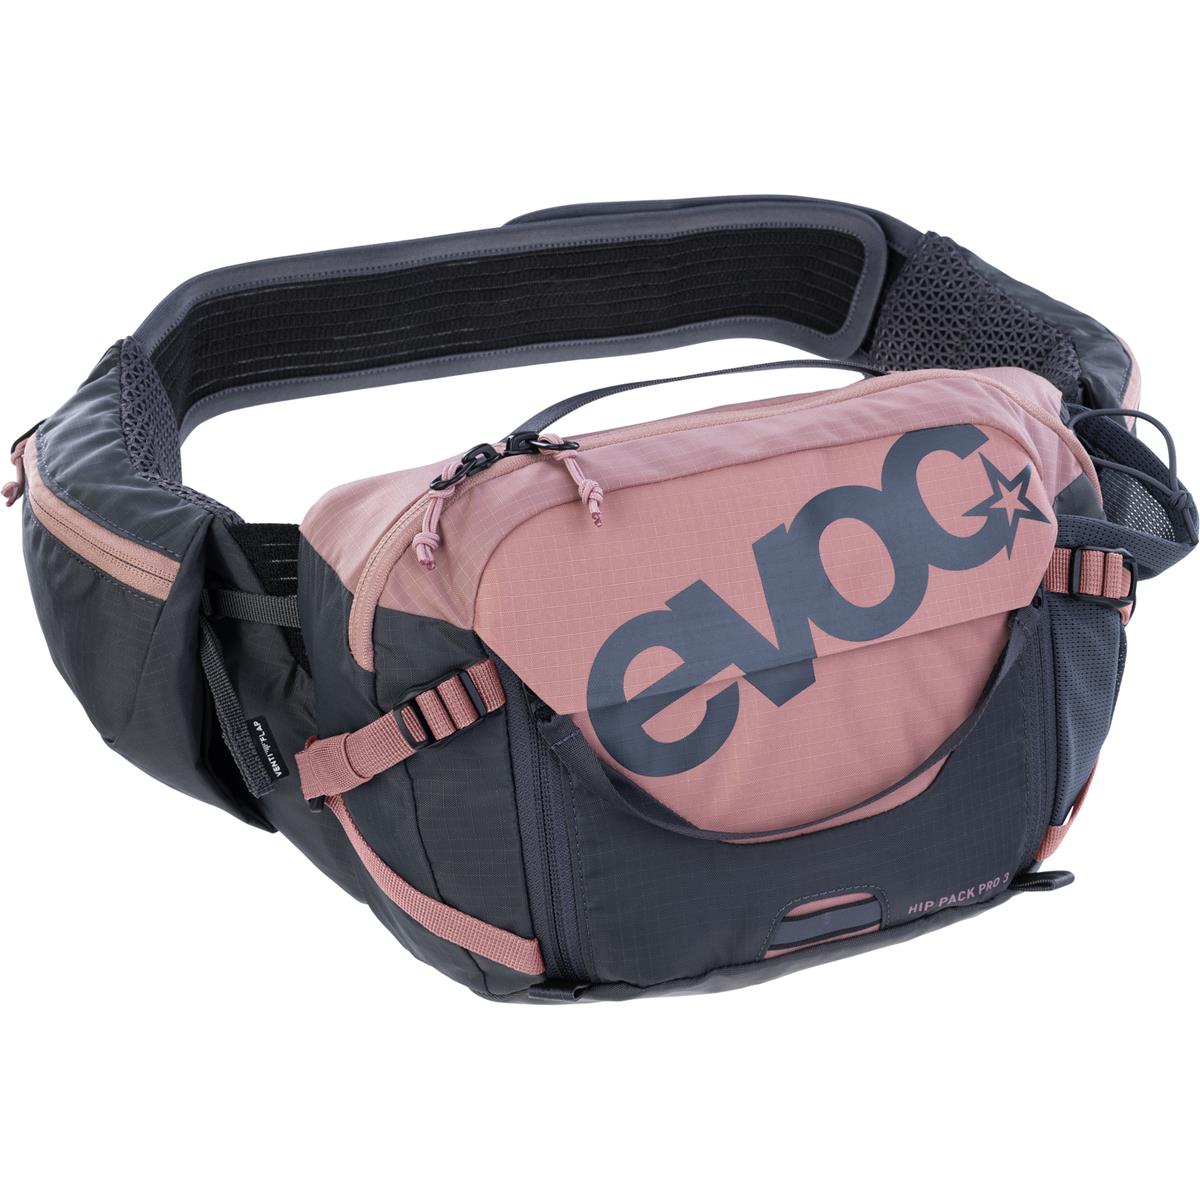 Evoc Hip Pack Hip Pack Pro 3 Dusty Pink/Carbon Gray